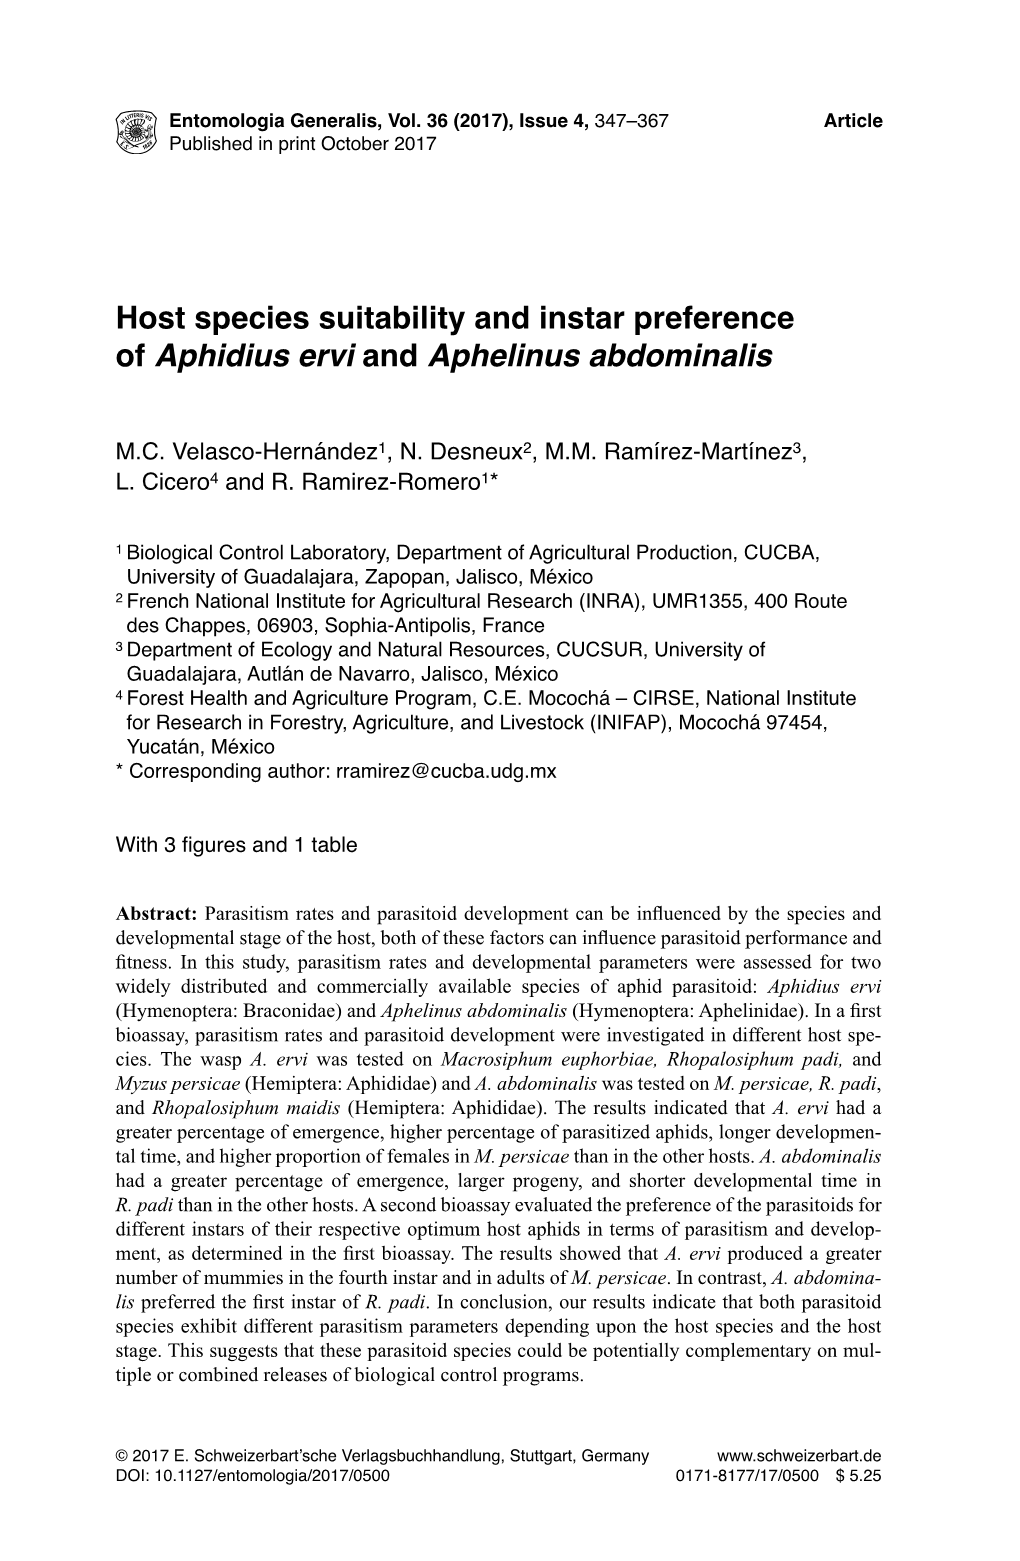 Host Species Suitability and Instar Preference of Aphidius Ervi and Aphelinus Abdominalis